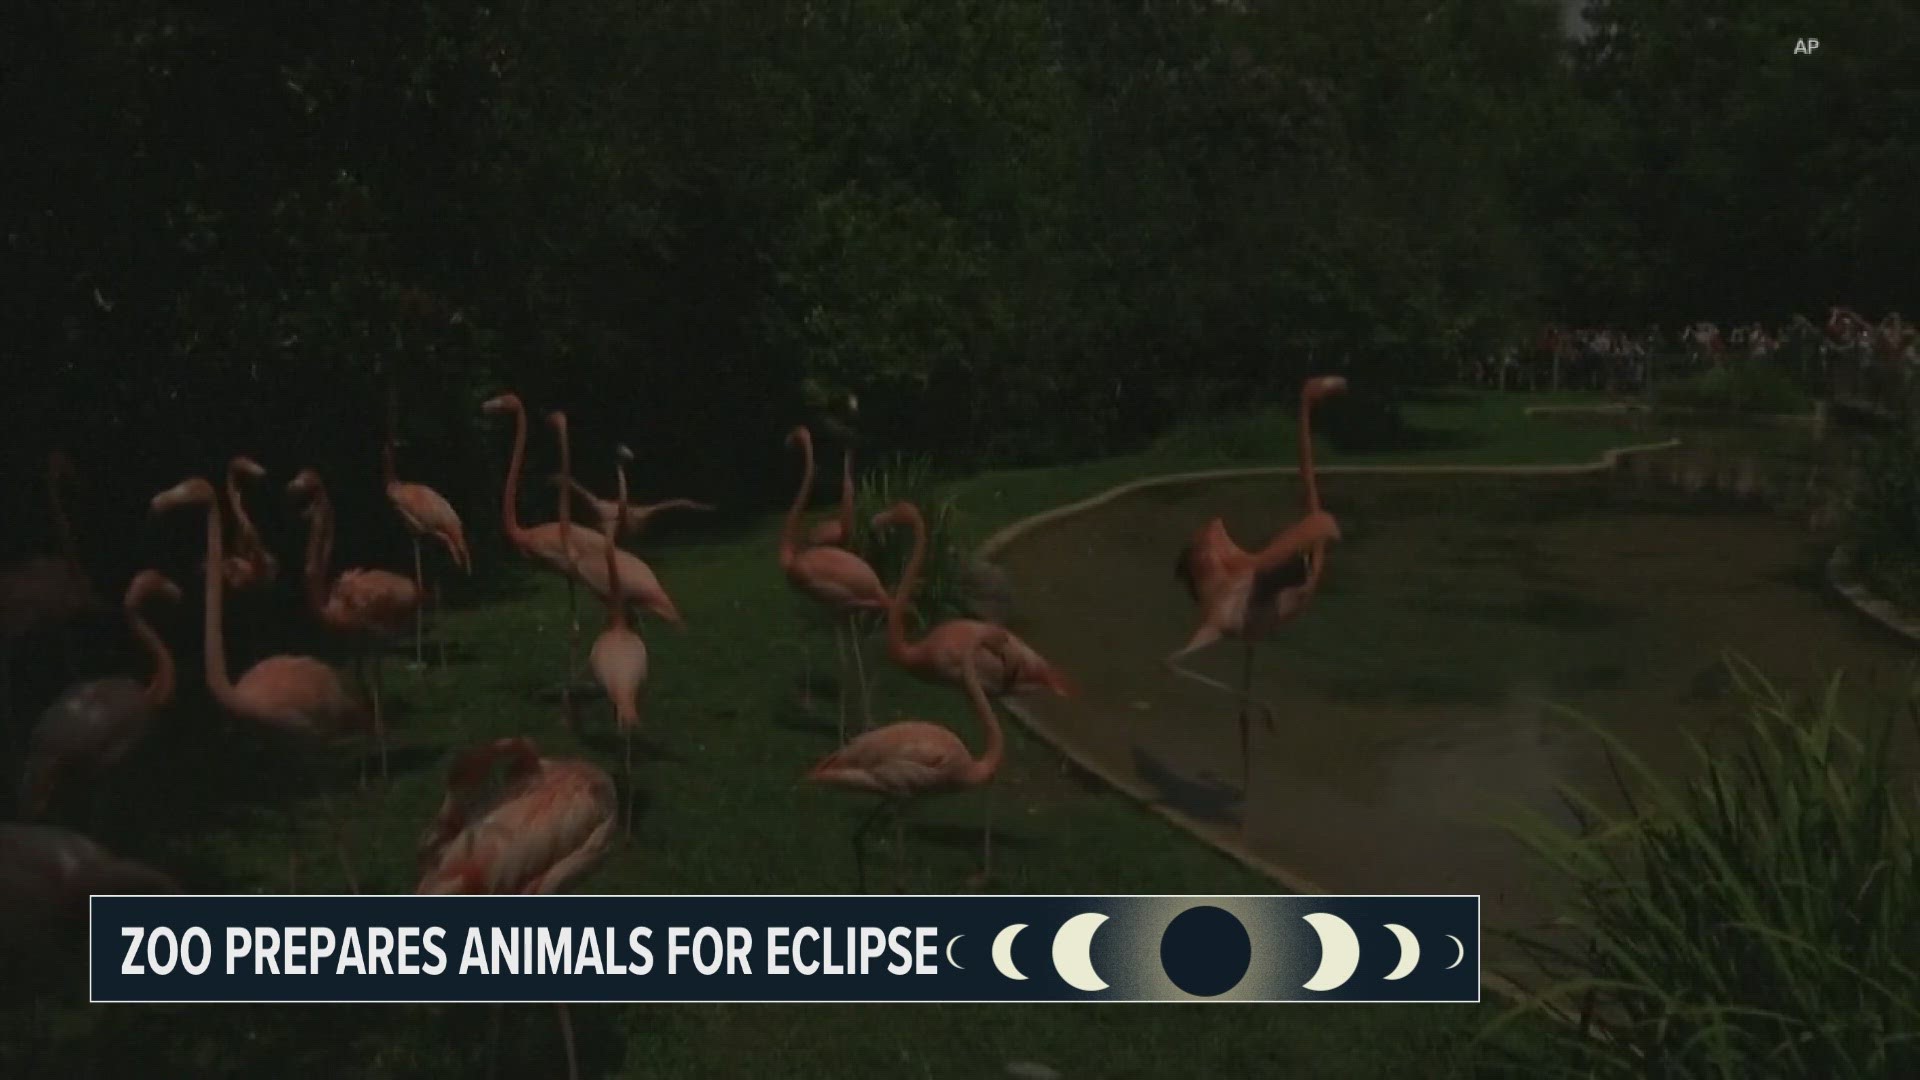 When the eclipse happens on Monday afternoon, leaders from John Ball Zoo will carefully monitor how the animals react.